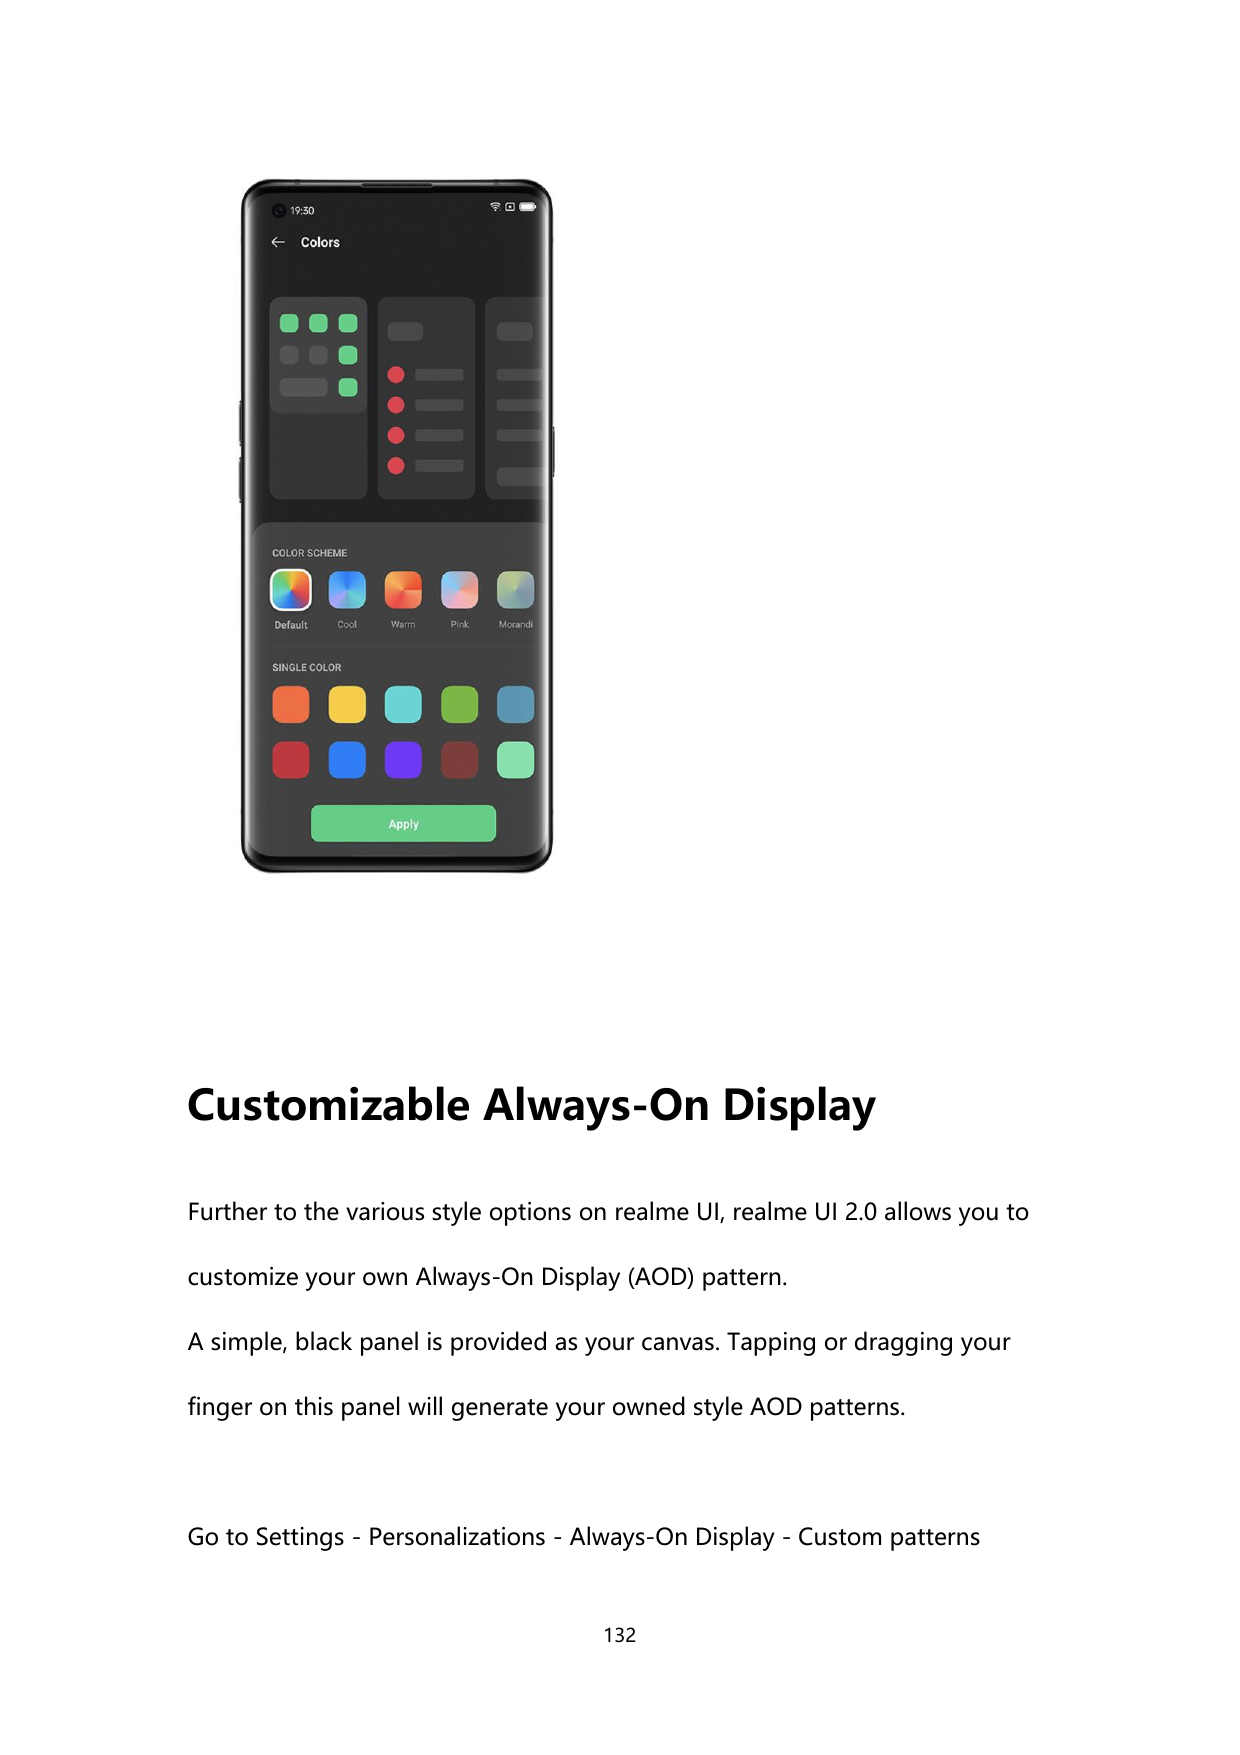 Customizable Always-On DisplayFurther to the various style options on realme UI, realme UI 2.0 allows you tocustomize your own A